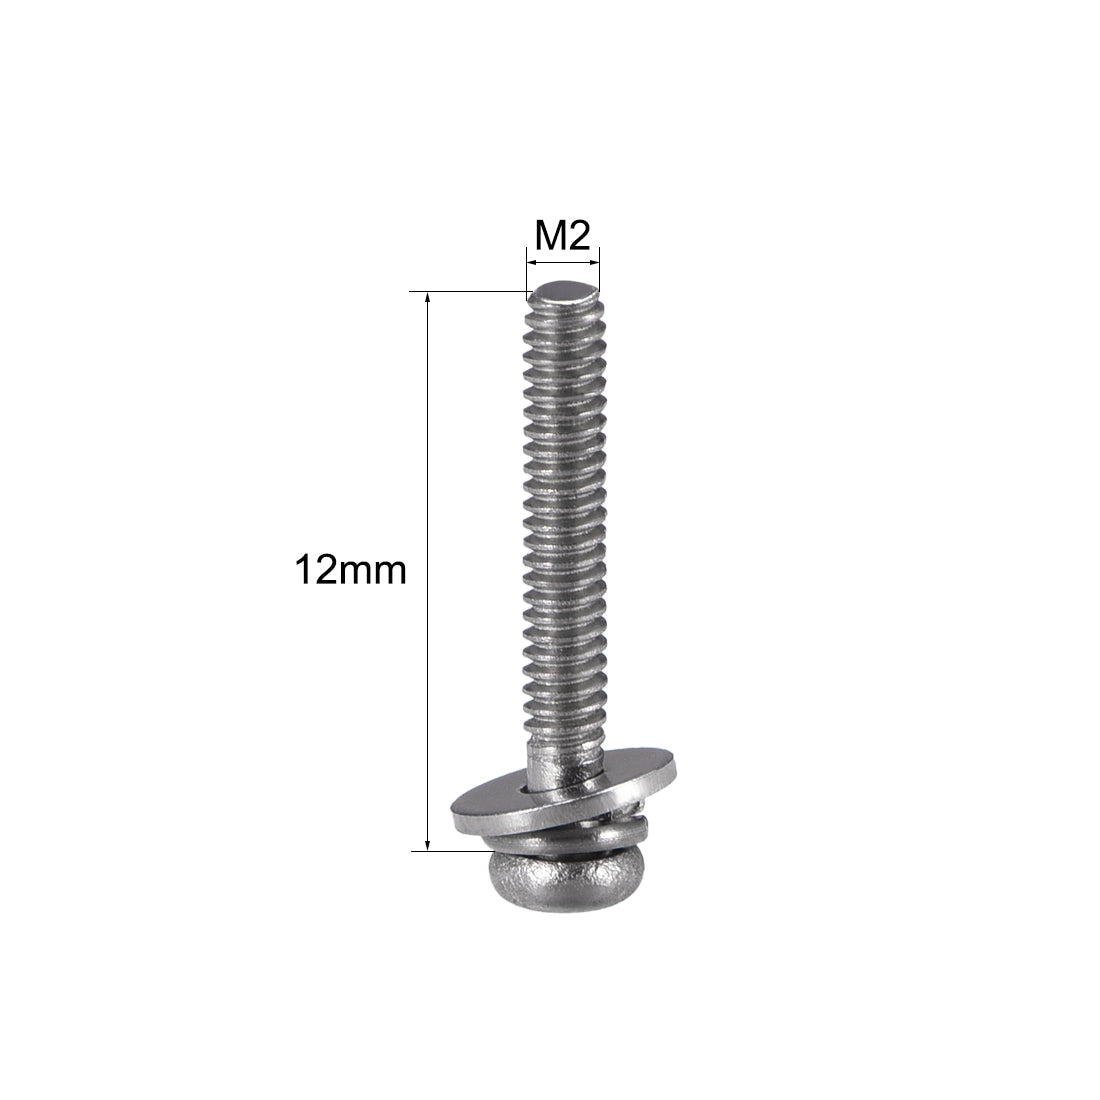 Uxcell Uxcell M2.5 x 16mm Stainless Steel Phillips Pan Head Machine Screws Bolts Combine with Spring Washer and Plain Washers 20pcs